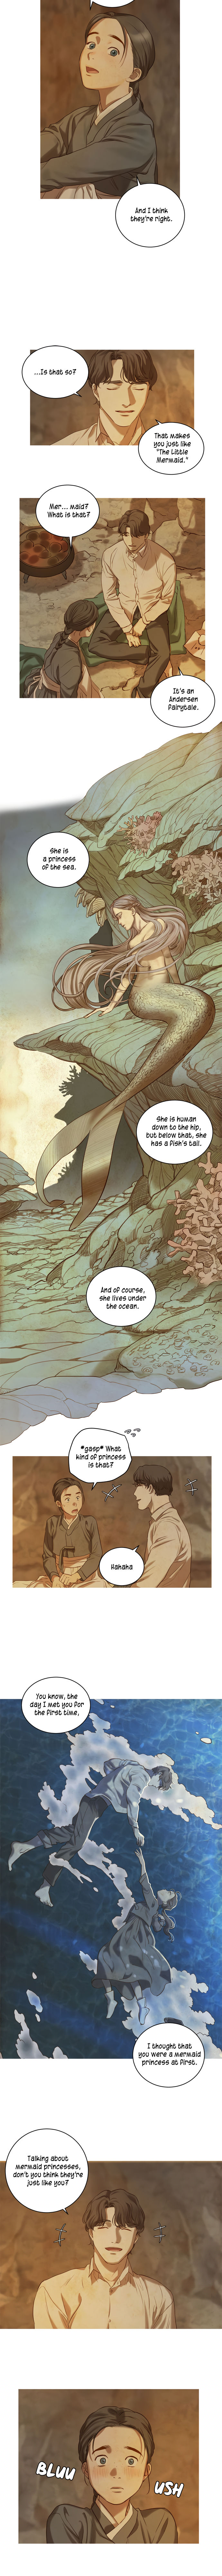 Gorae Byul - The Gyeongseong Mermaid - Chapter 4 Page 6